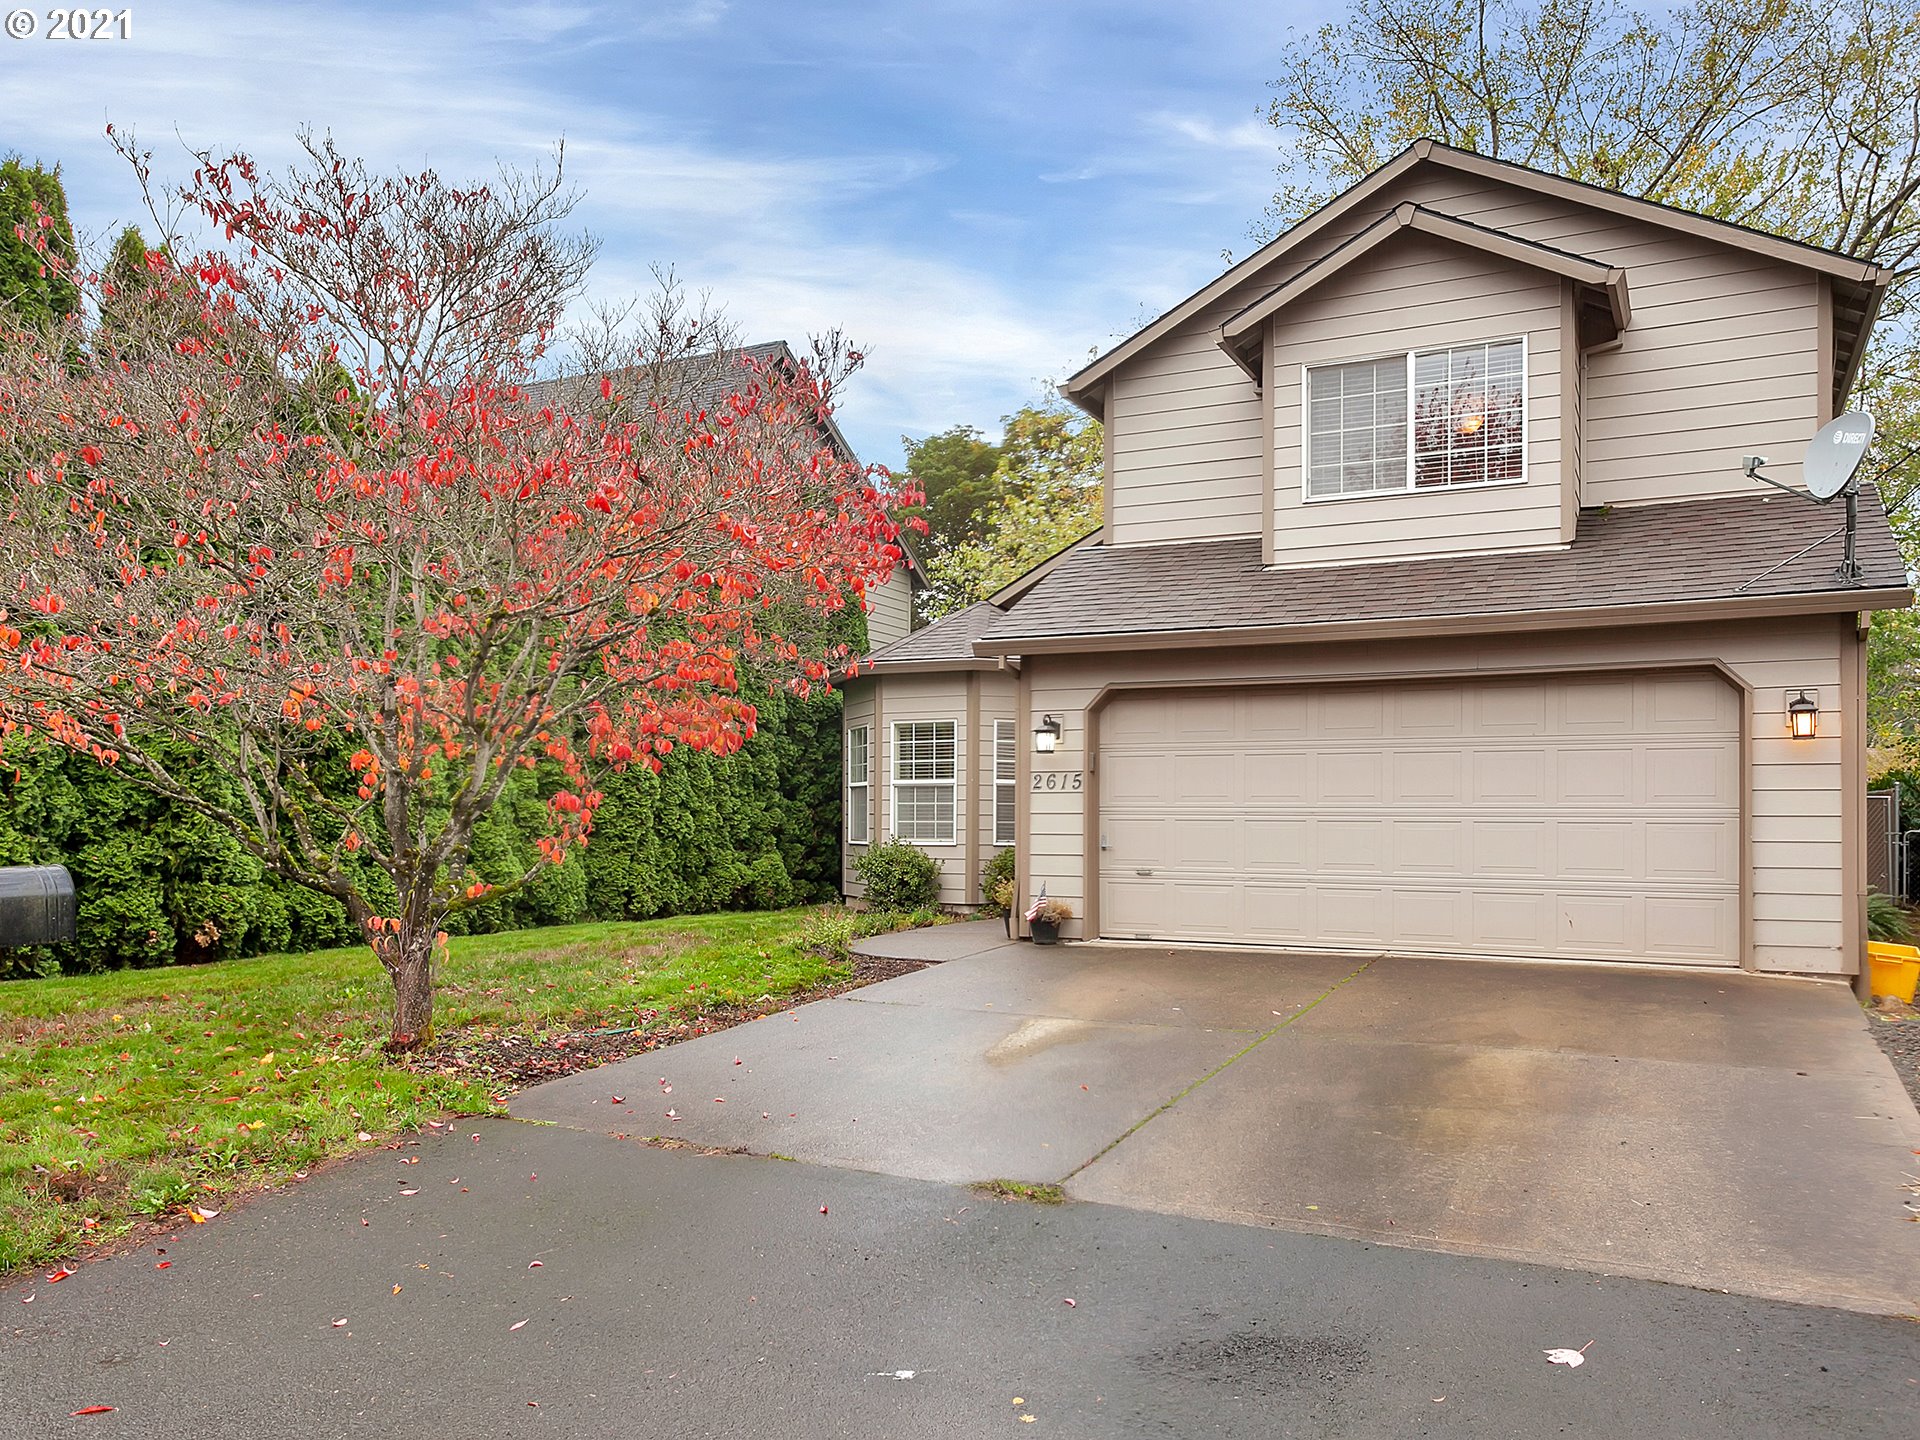 2615 SE 167TH AVE (1 of 32)